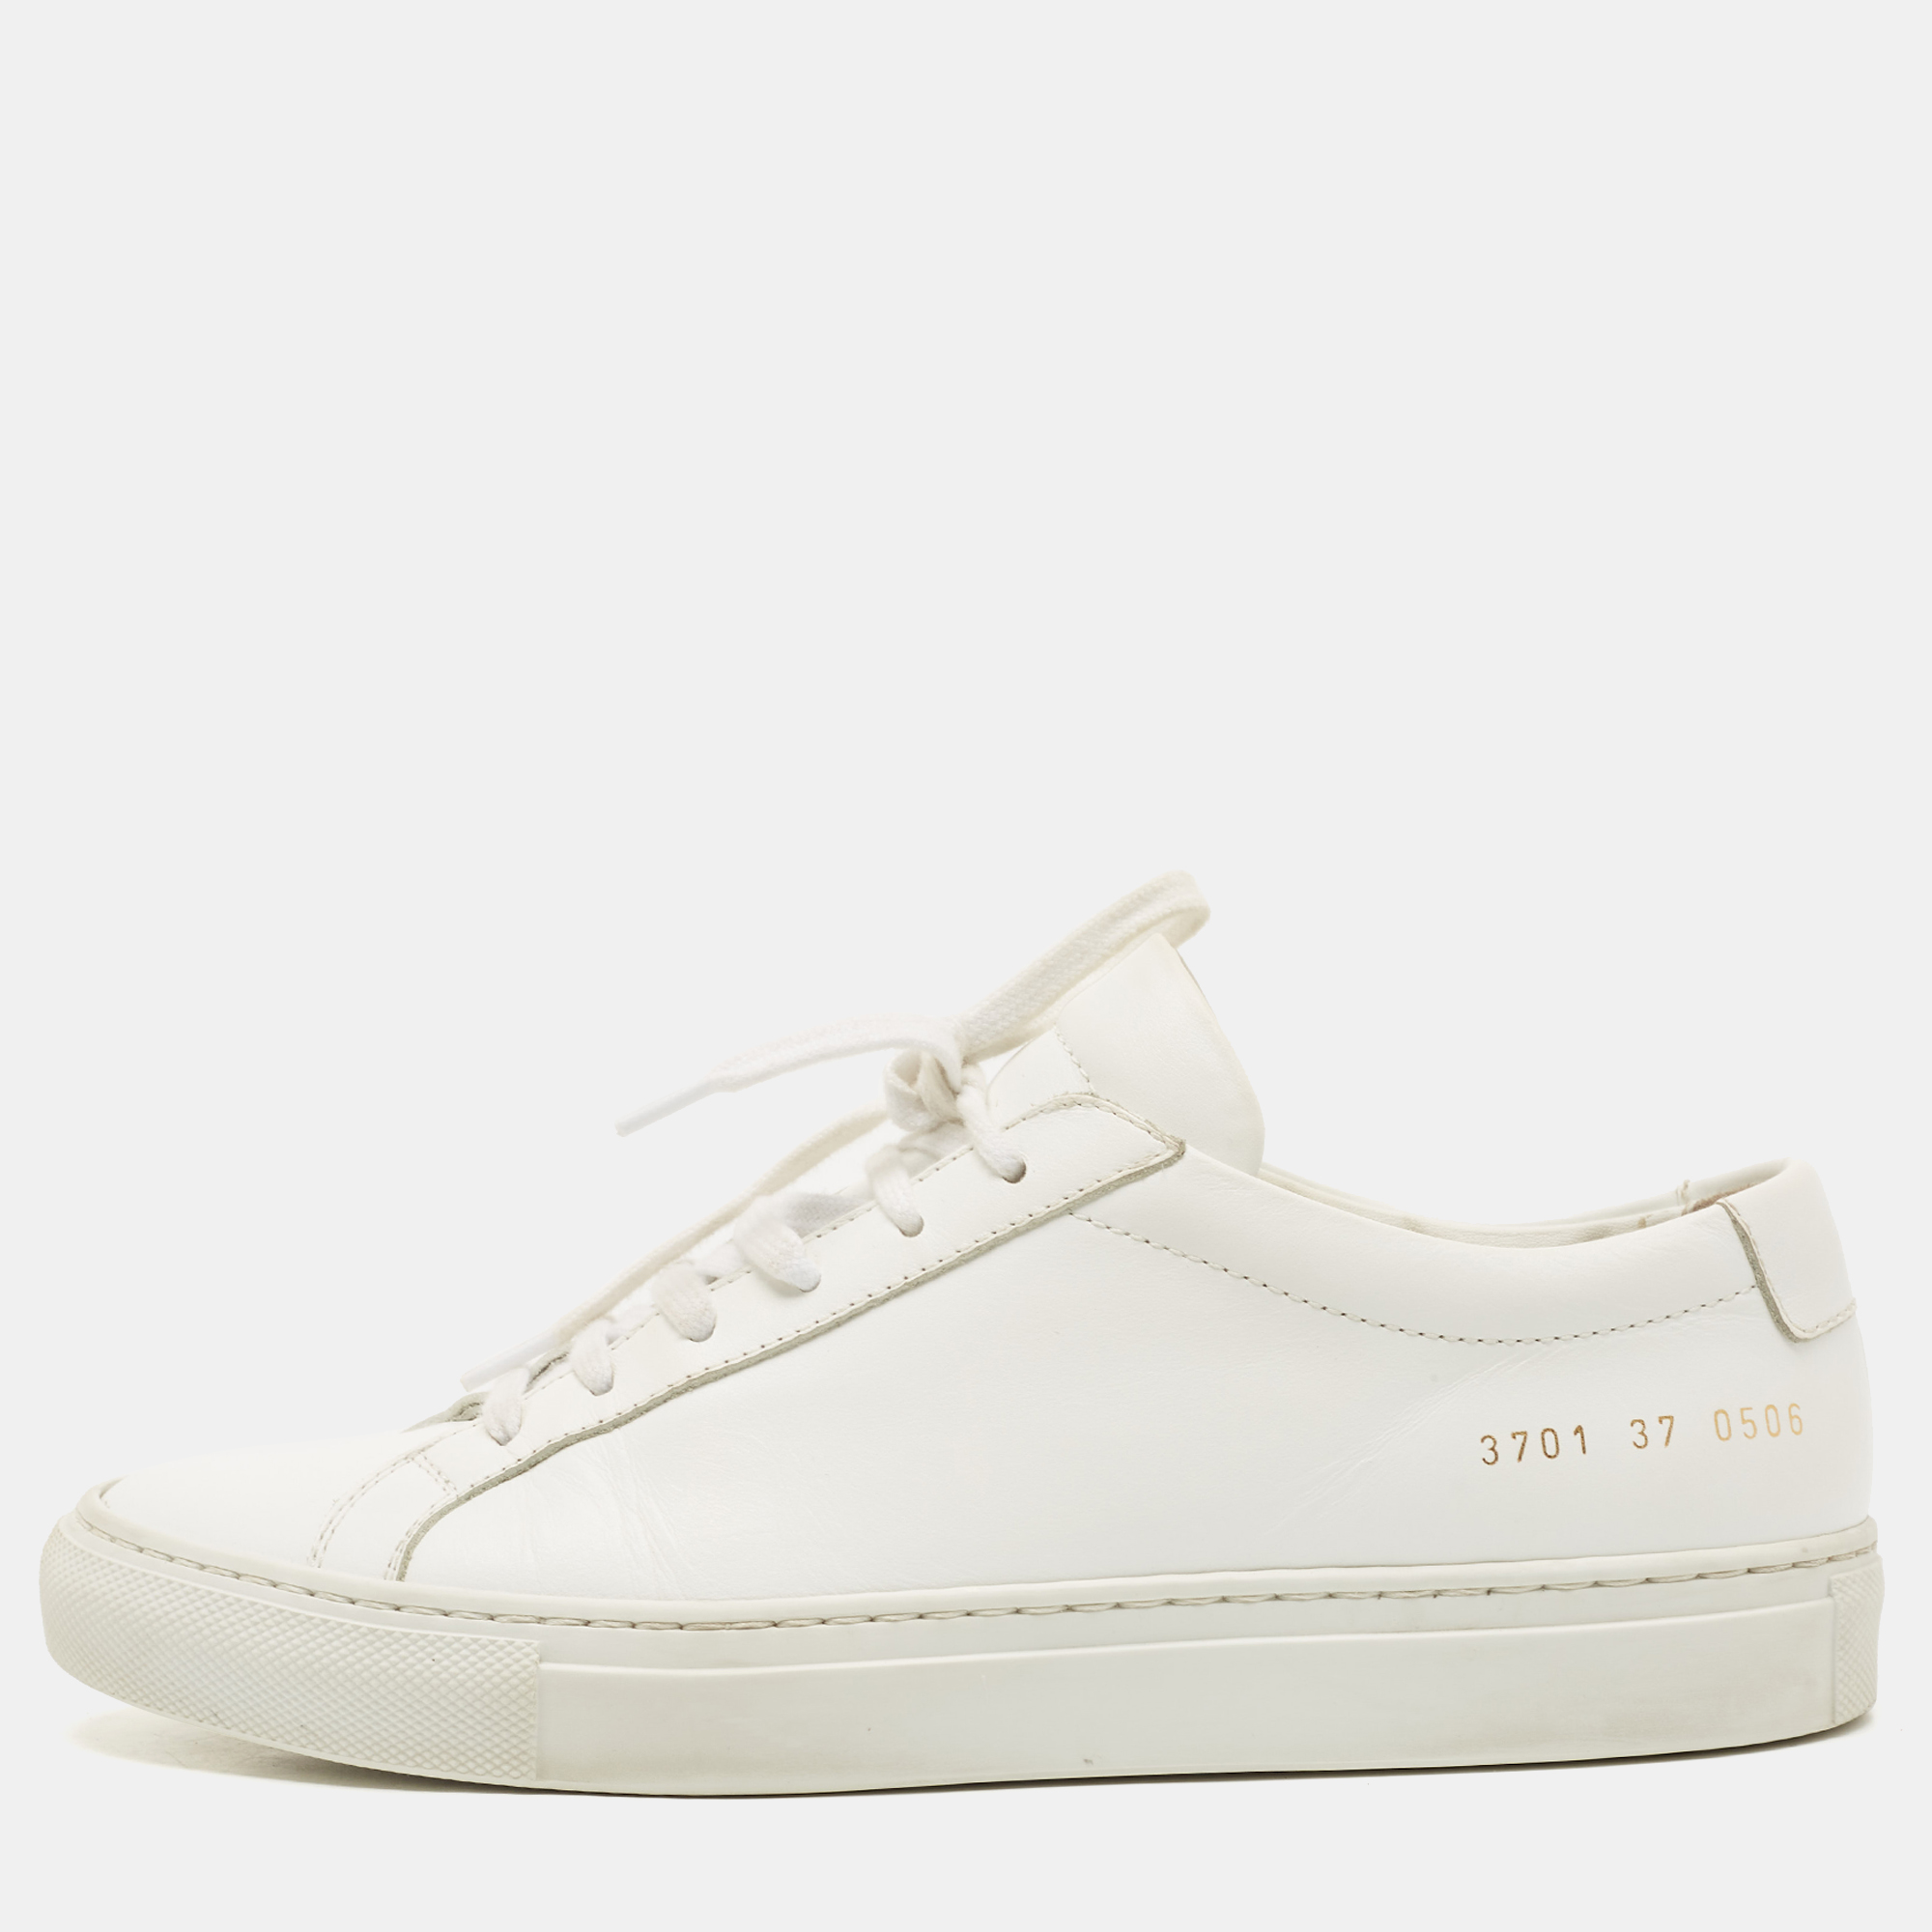 Pre-owned Common Projects White Leather Achilles Sneakers Size 37